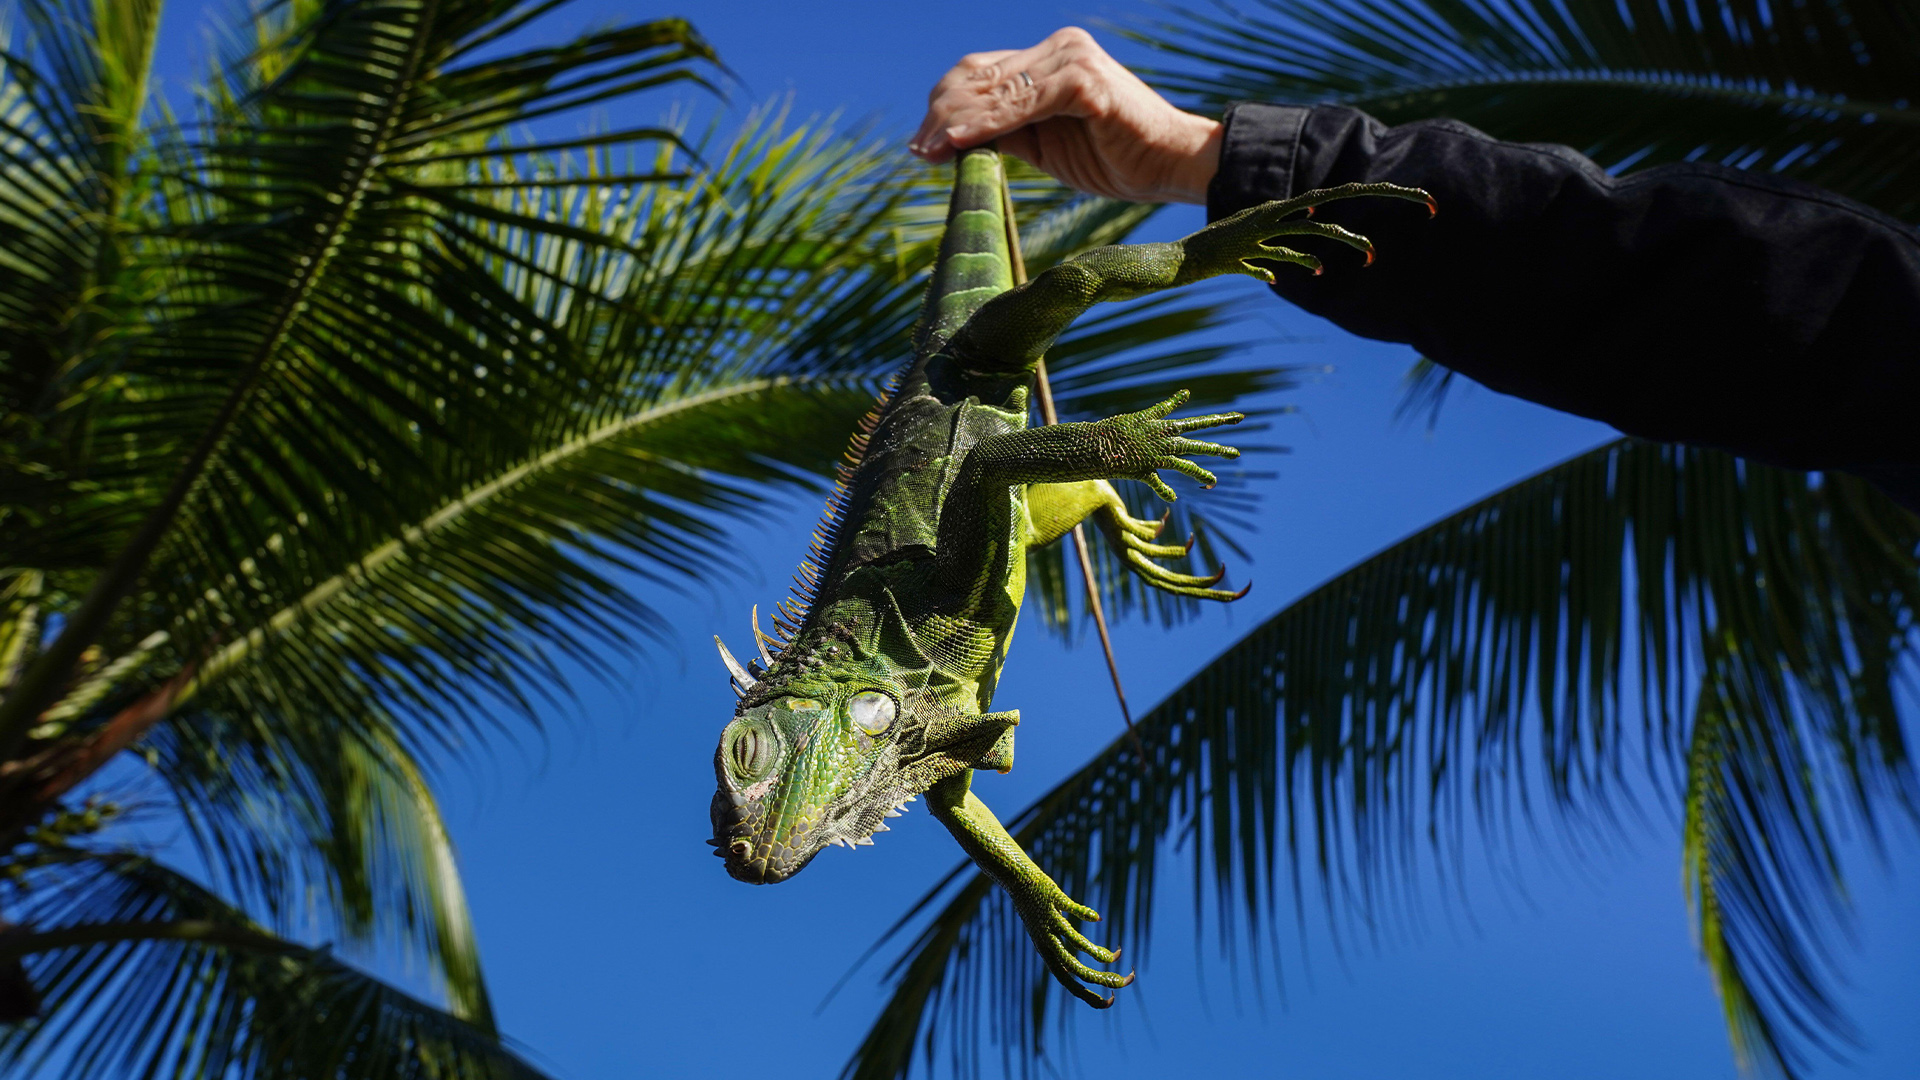 Frozen iguanas are falling from trees, but don't worry!